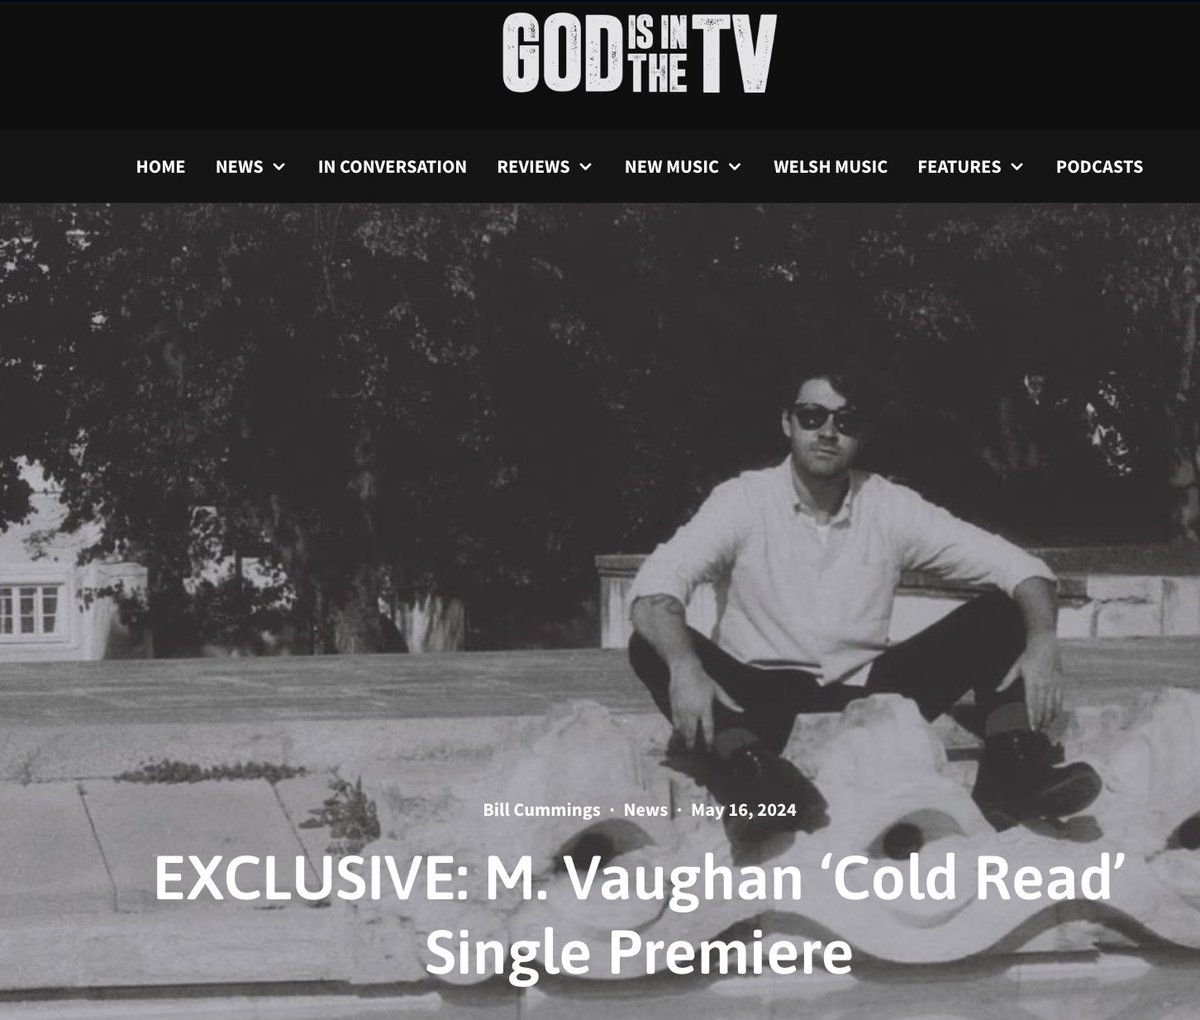 The 'Cold Read' single from M. Vaughan premieres today with @godisinthetv! Listen: godisinthetvzine.co.uk/2024/05/16/exc…